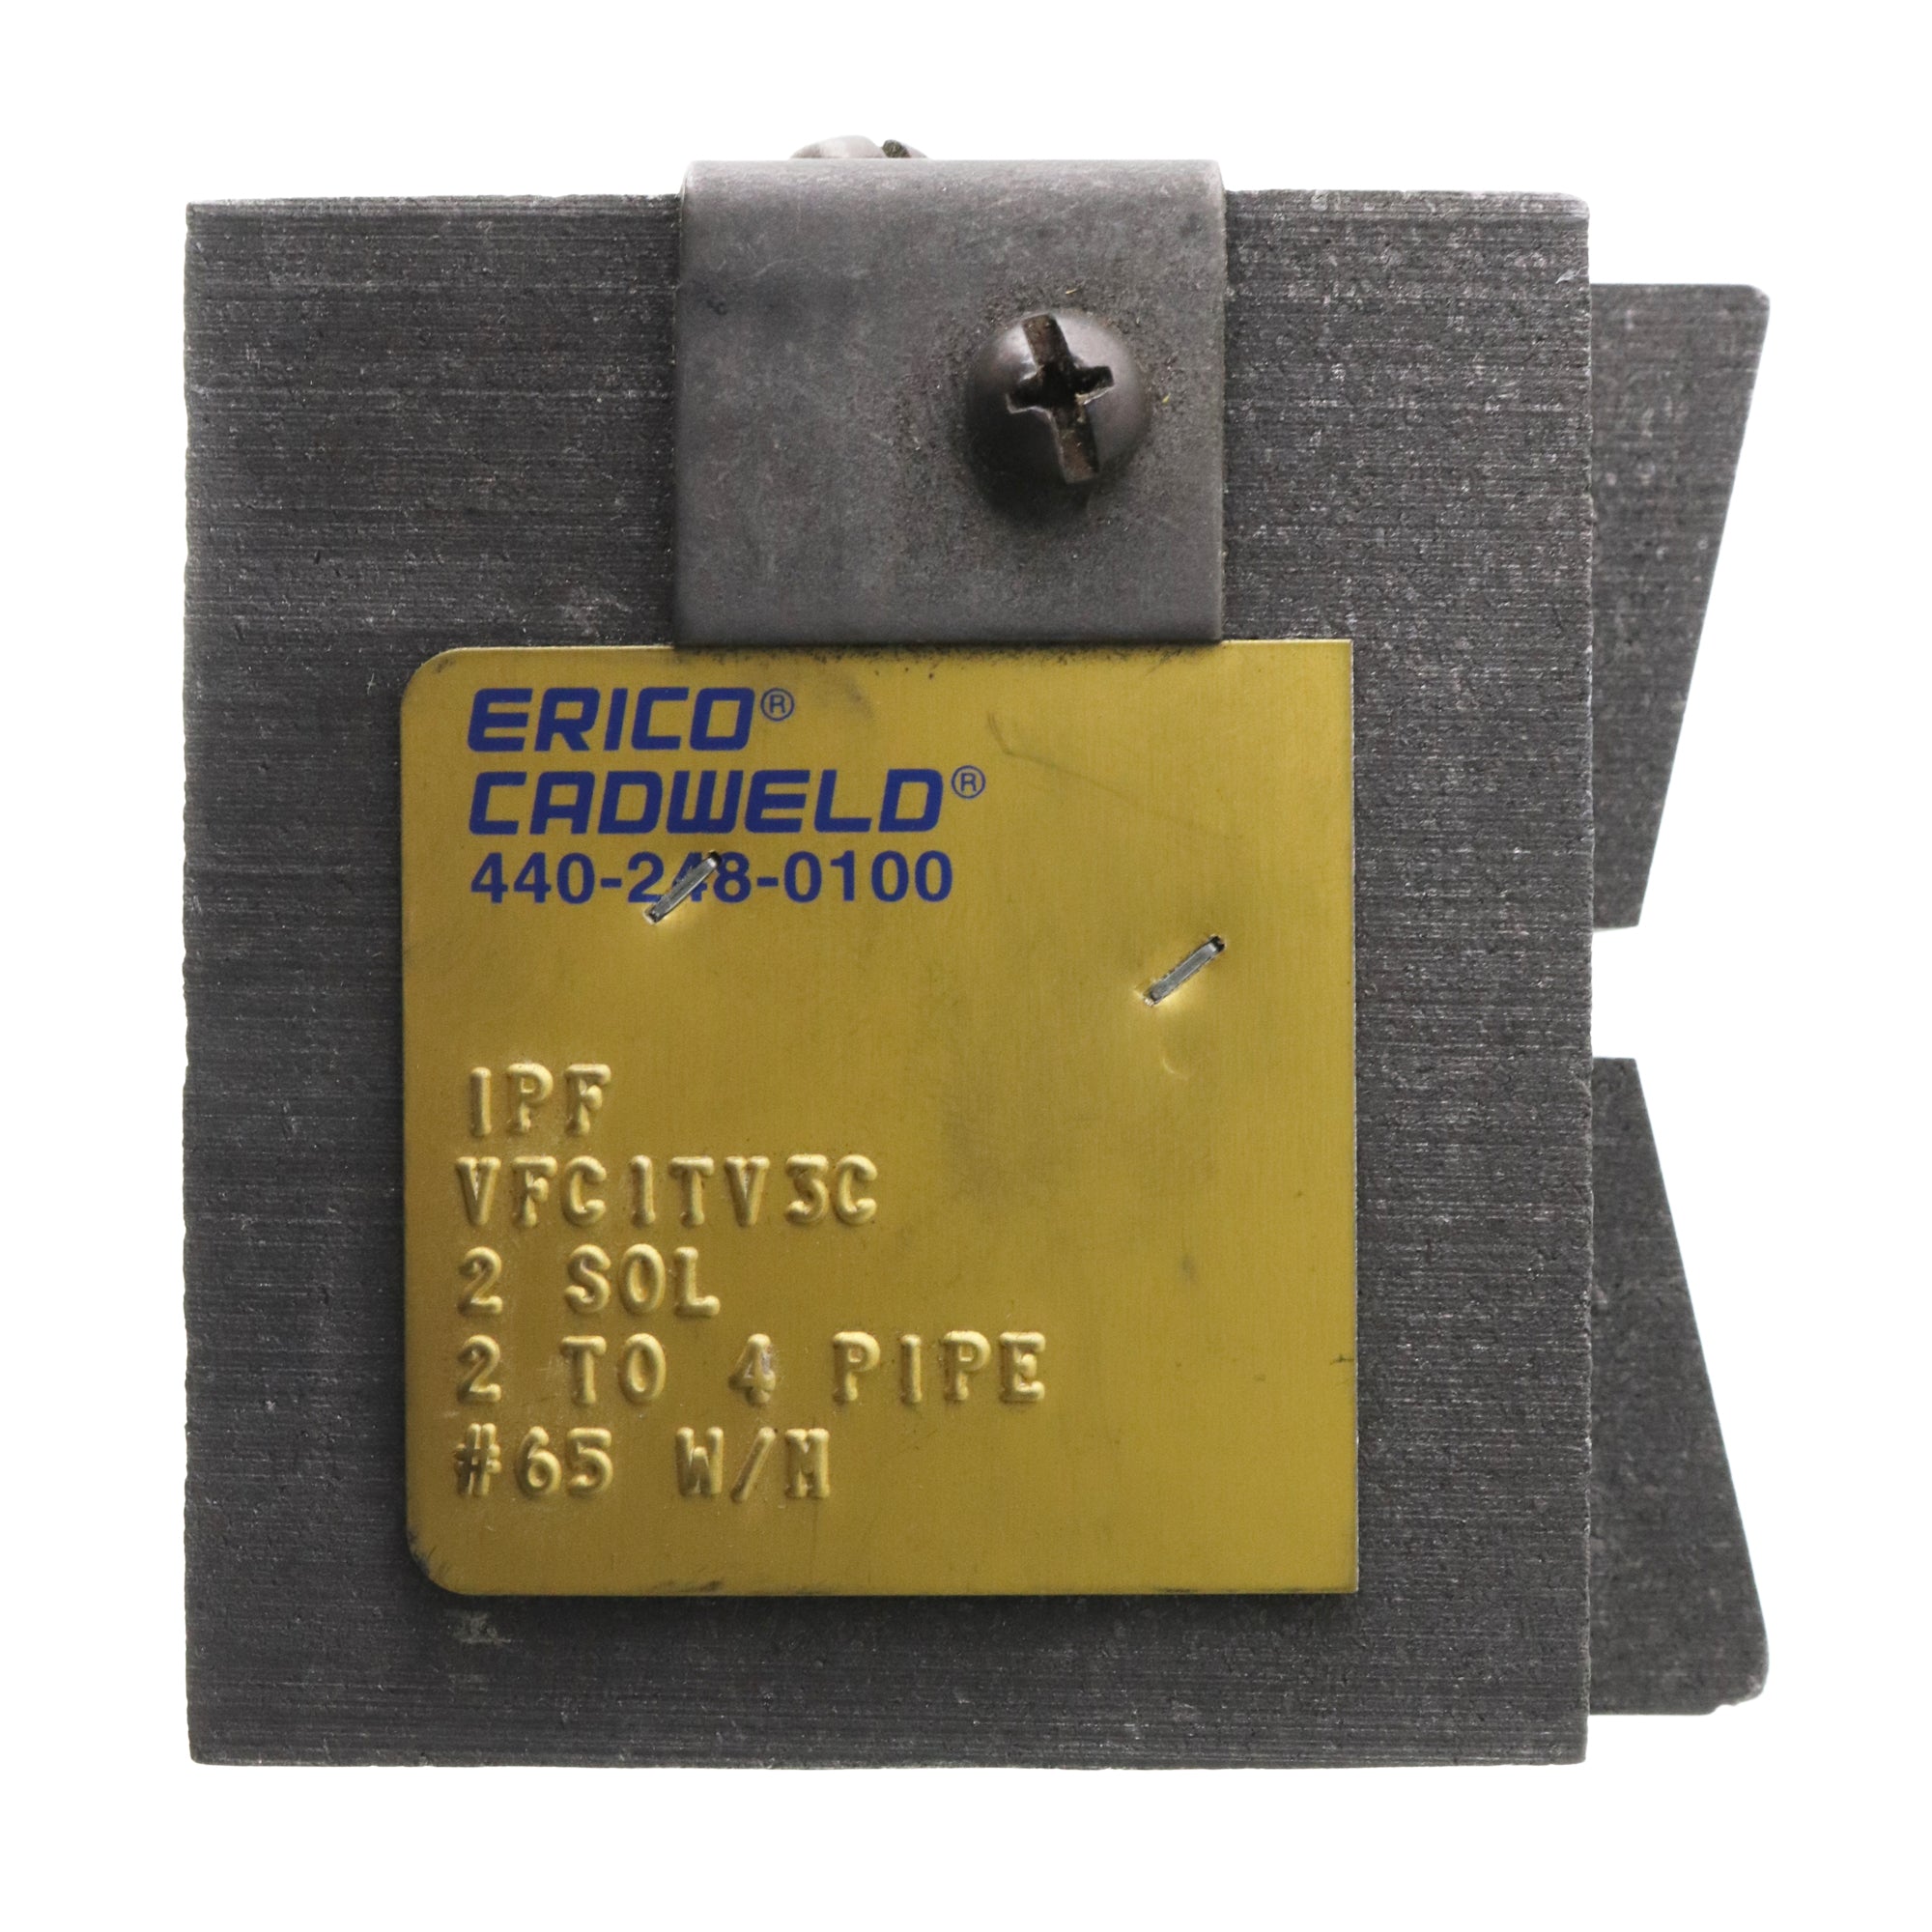 Erico Caddy Cadwal, CADWELD ERICO VFC1TV3C #2 SOLID CONDUCTOR CABLE TO 2"-4" STEEL PIPE MOLD